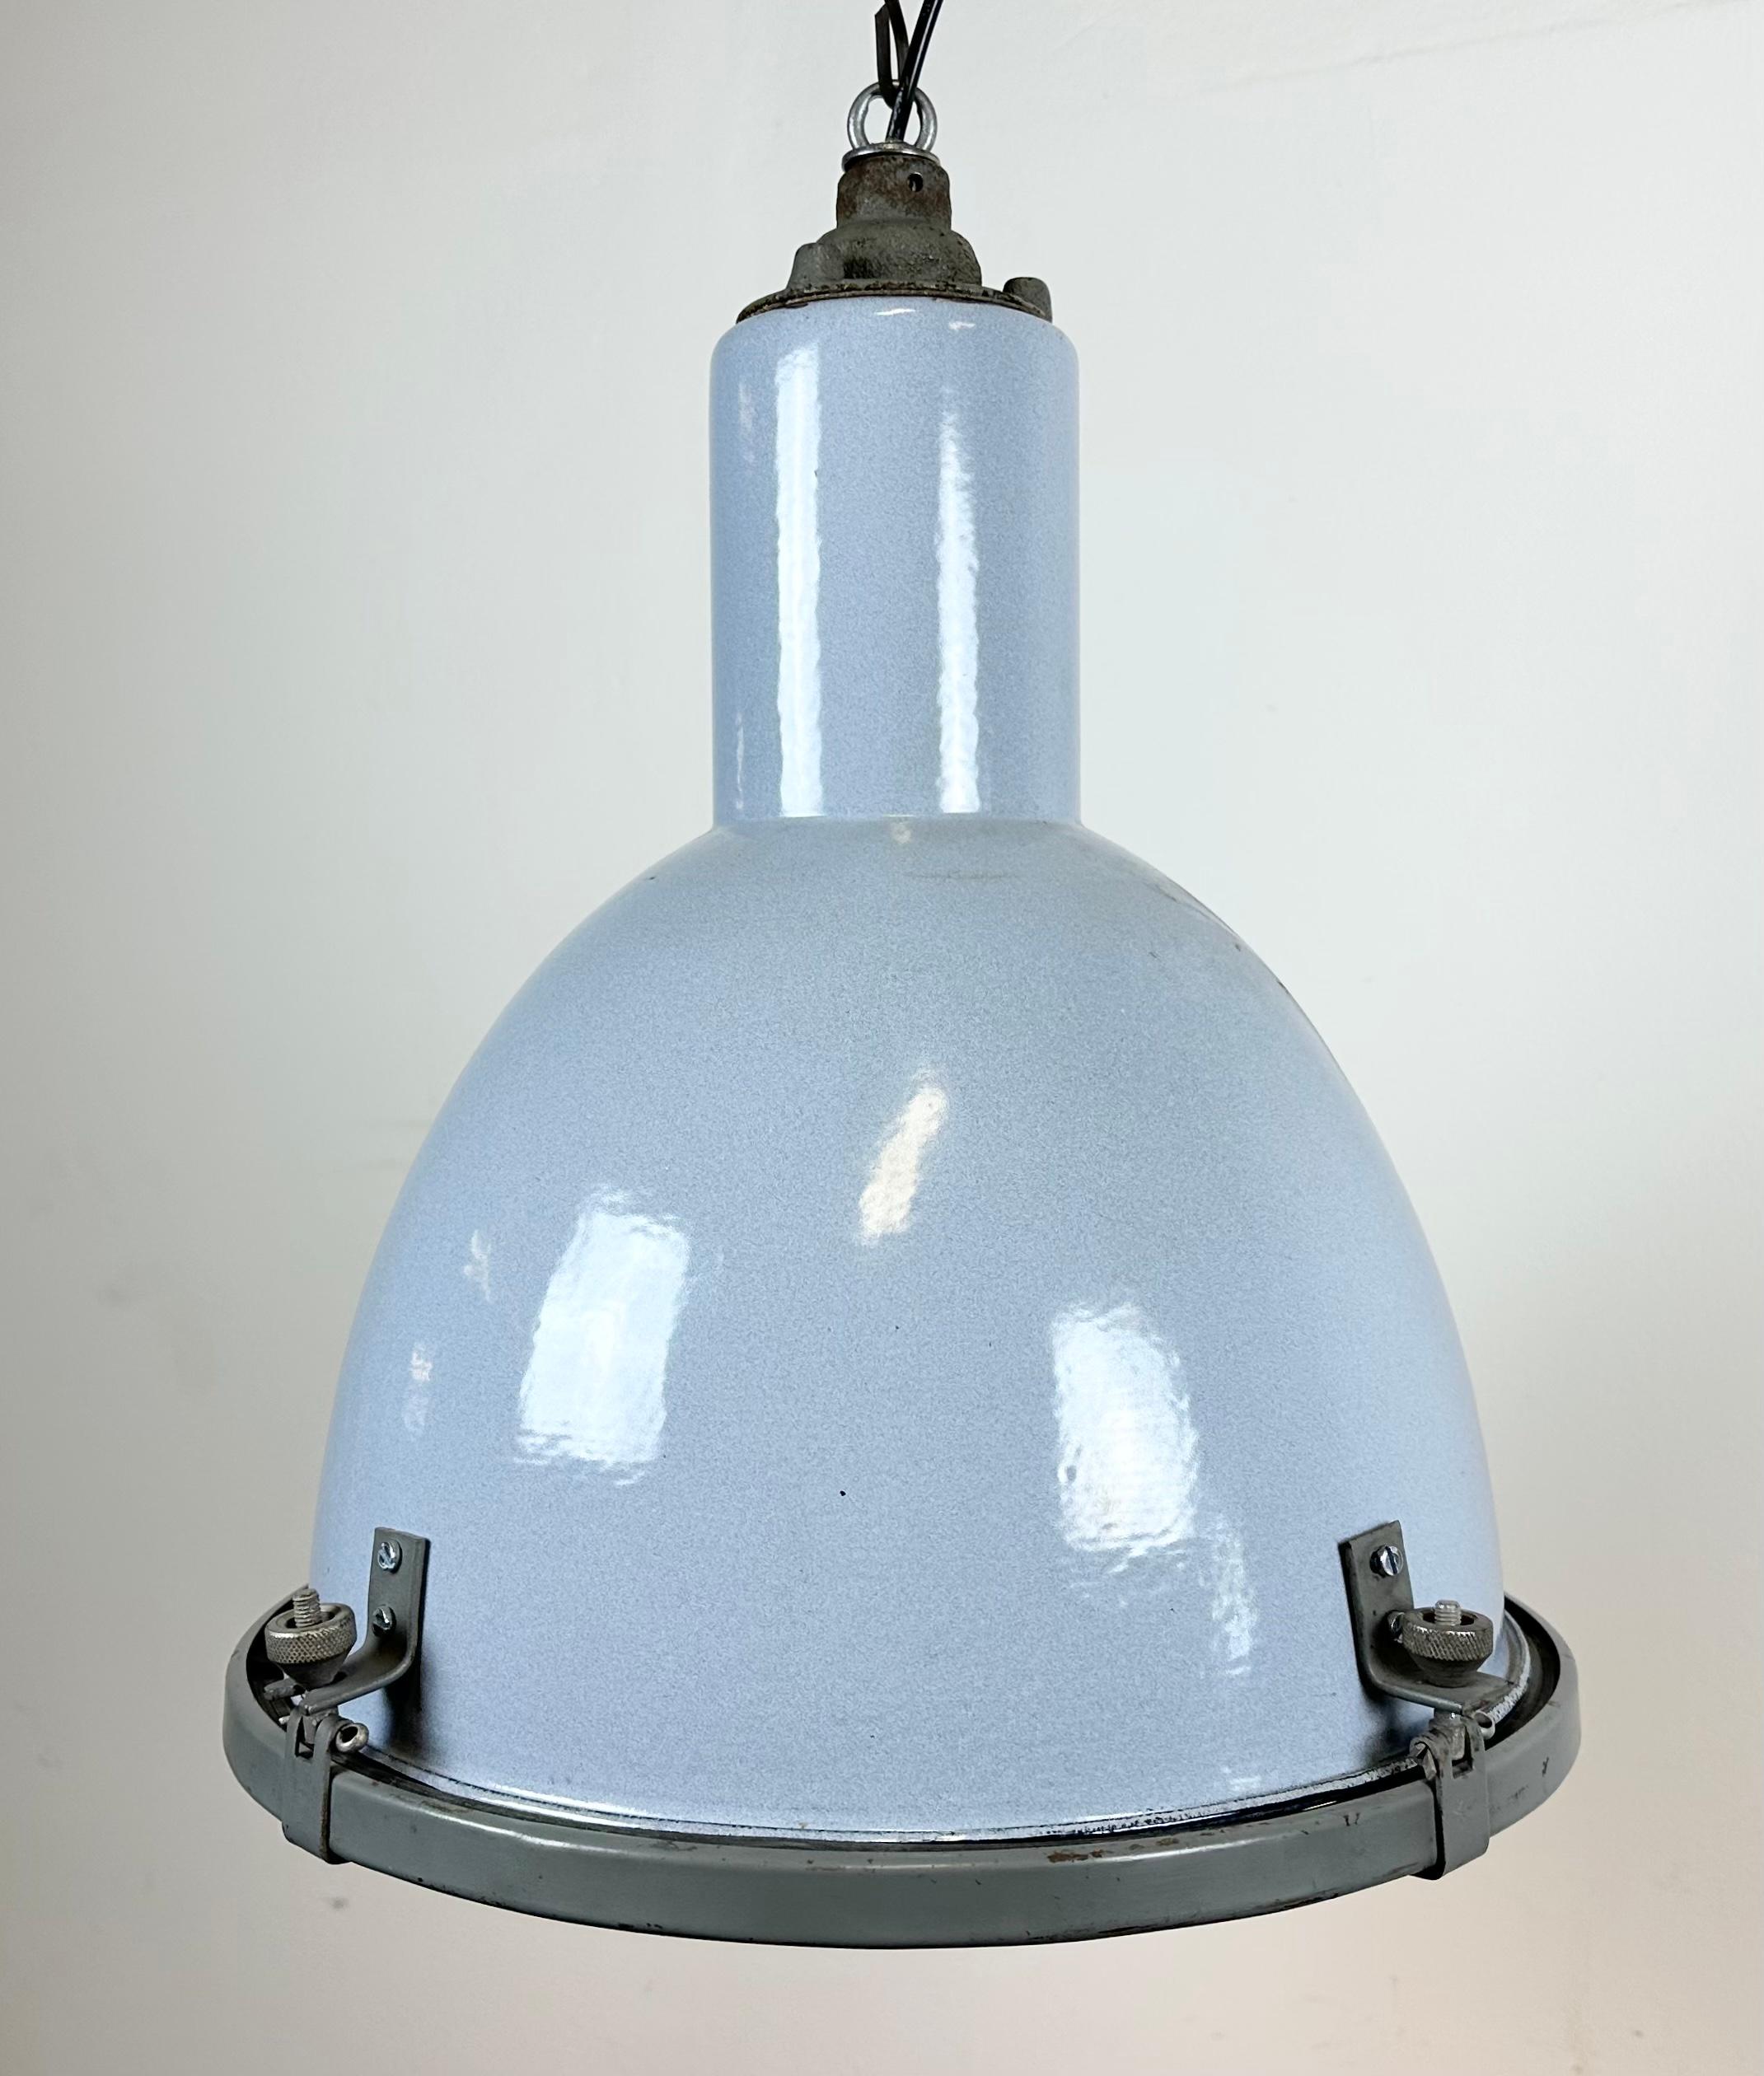 Czech Bauhaus Grey Enamel Industrial Pendant Lamp with Glass Cover, 1950s For Sale